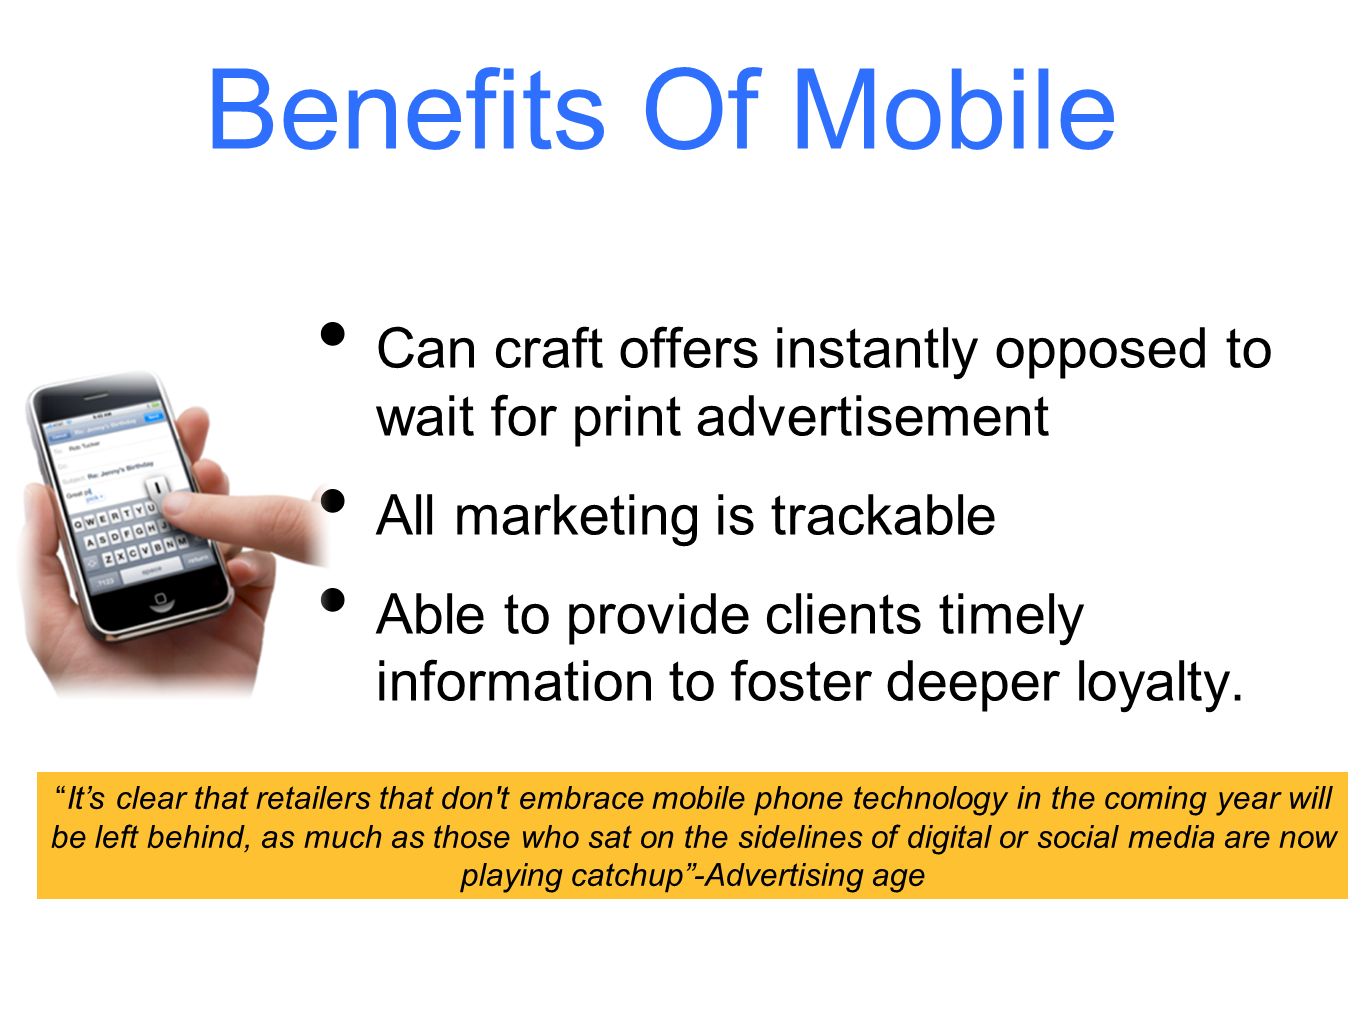 Benefits Of Mobile Can craft offers instantly opposed to wait for print advertisement All marketing is trackable Able to provide clients timely information to foster deeper loyalty.